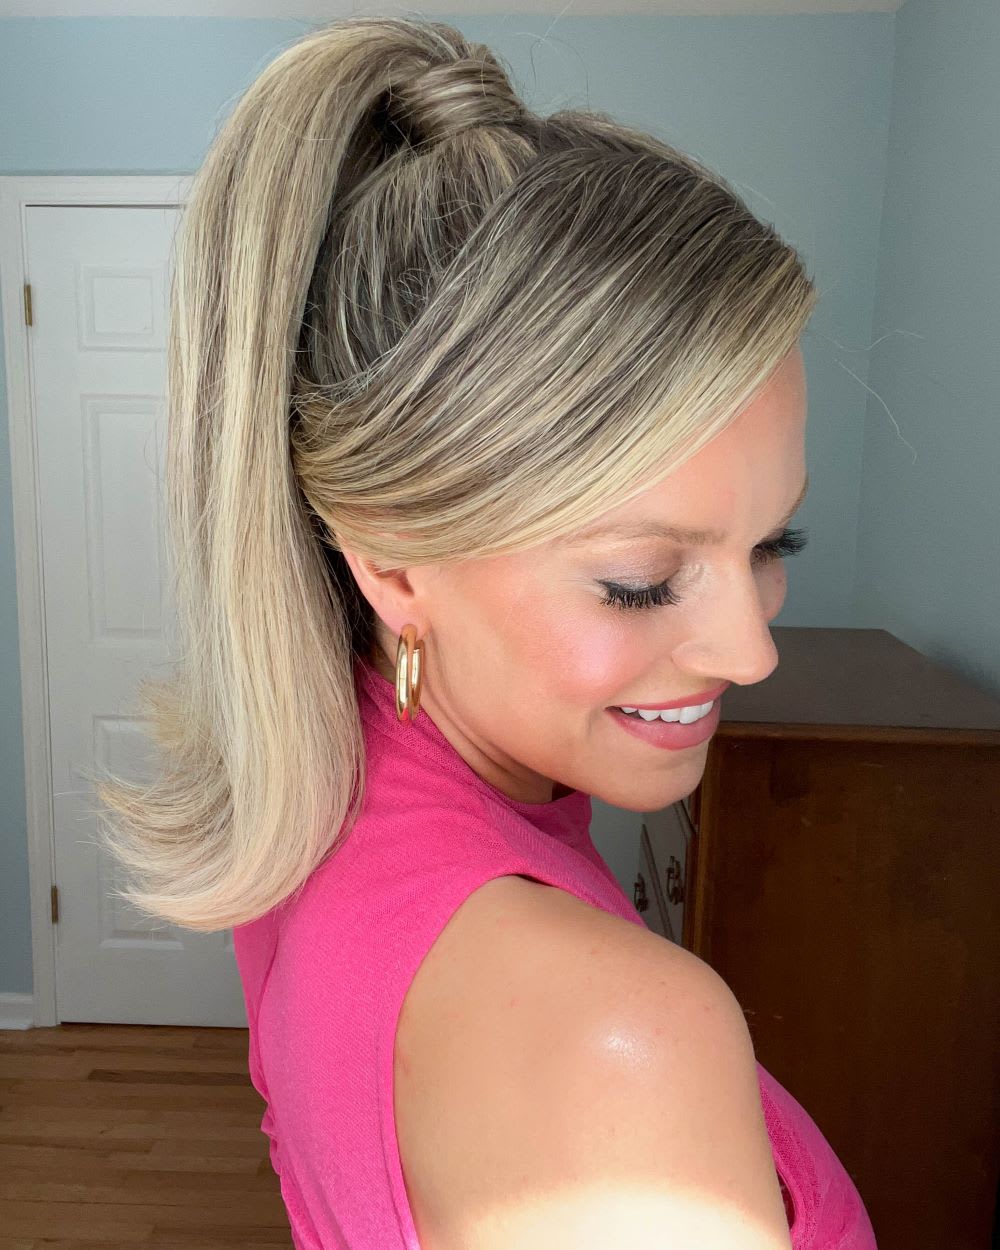 How To Do A Barbiecore Ponytail With Swoop - Lulus.com Fashion Blog